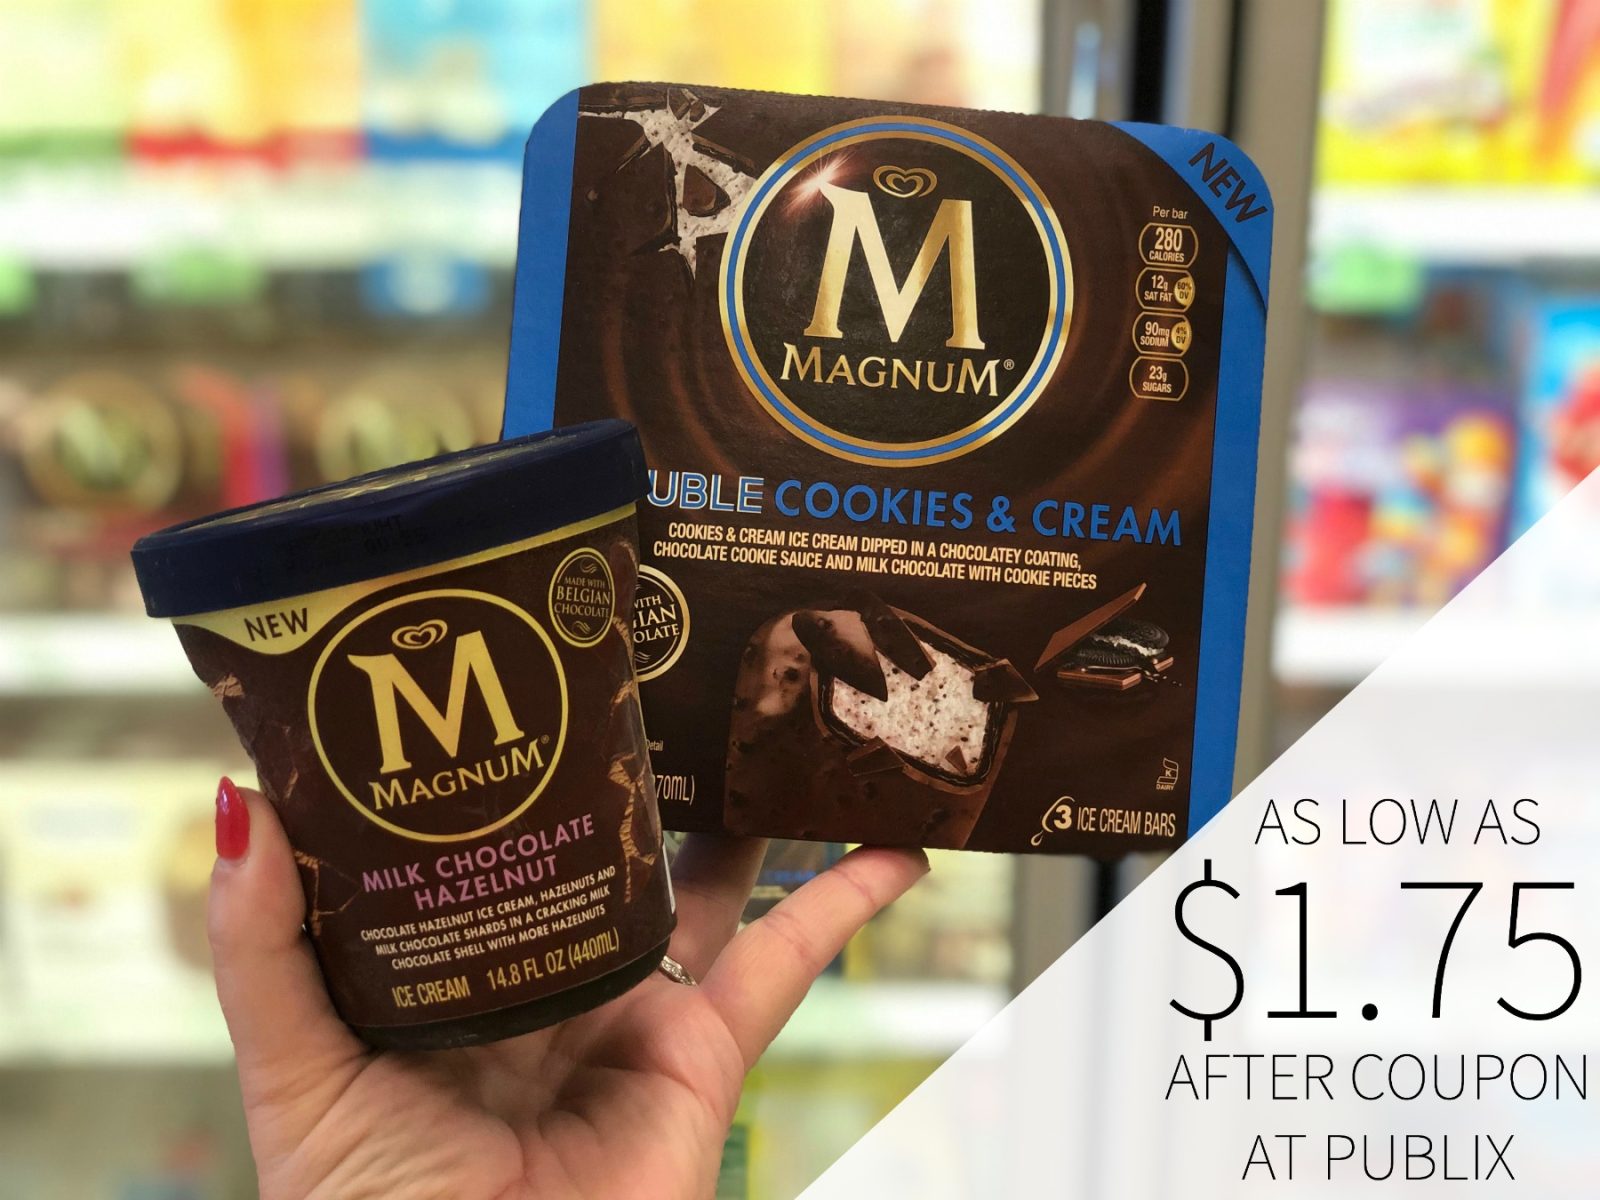 Stock Up On Magnum Bars And Tubs During The Publix BOGO Sale – Treats As Low As $1.75!